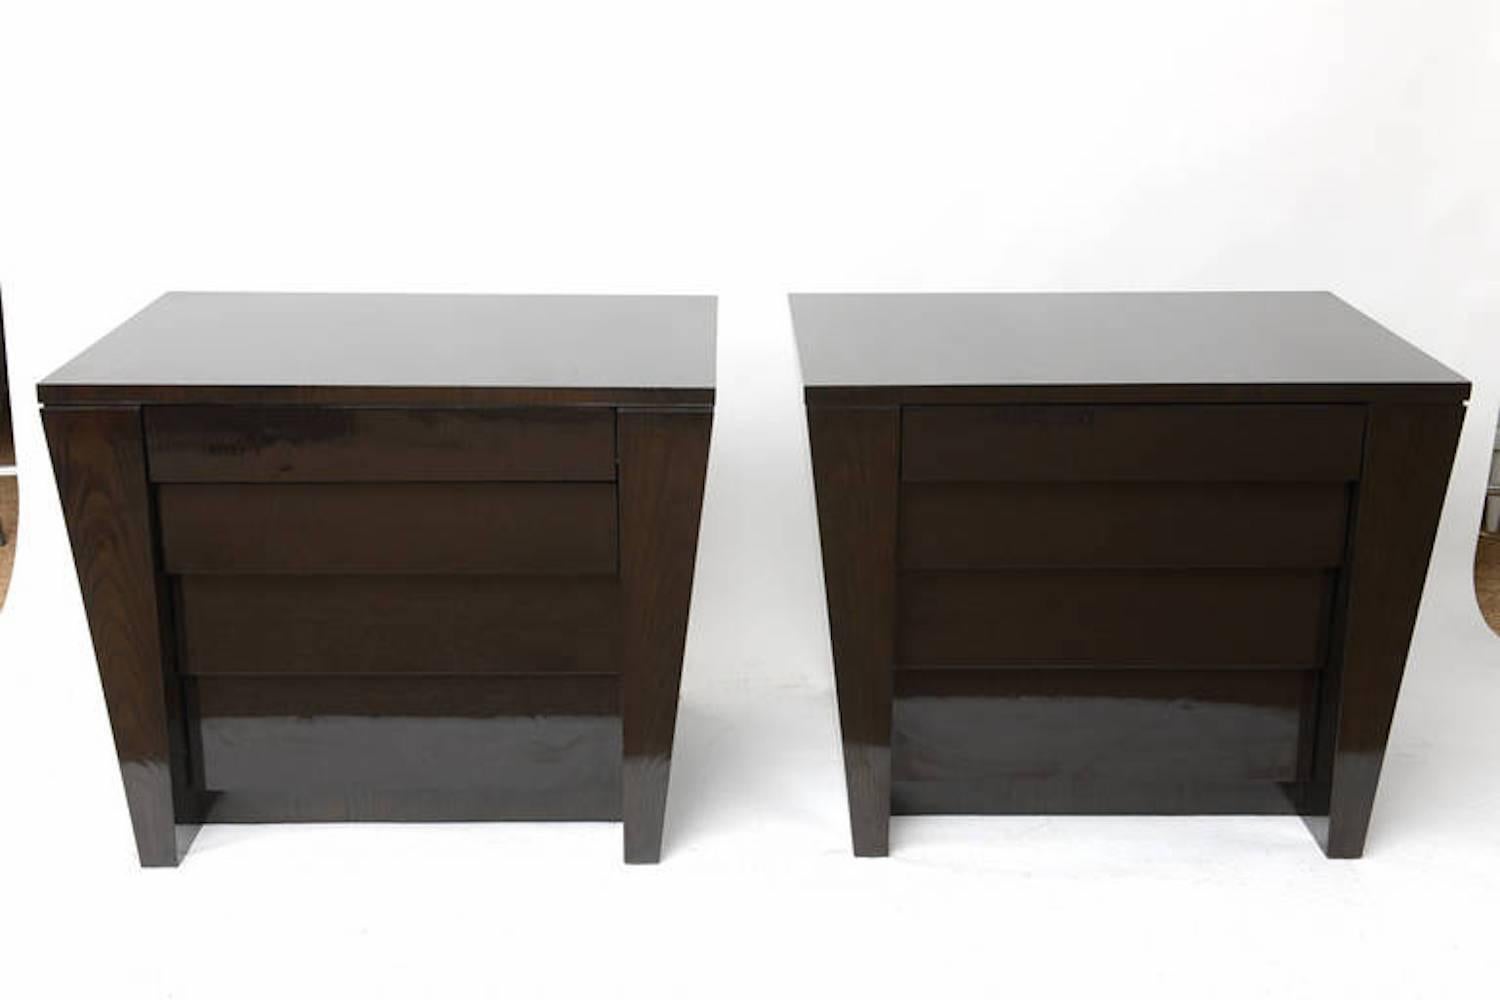 Pair of ebonized oak chests that taper on the sides and are inverted in the front. Four drawers each on gliders. The ebony is completed with a high gloss clear coat. Stunningly finished inside and out. These function both as chests of drawers and